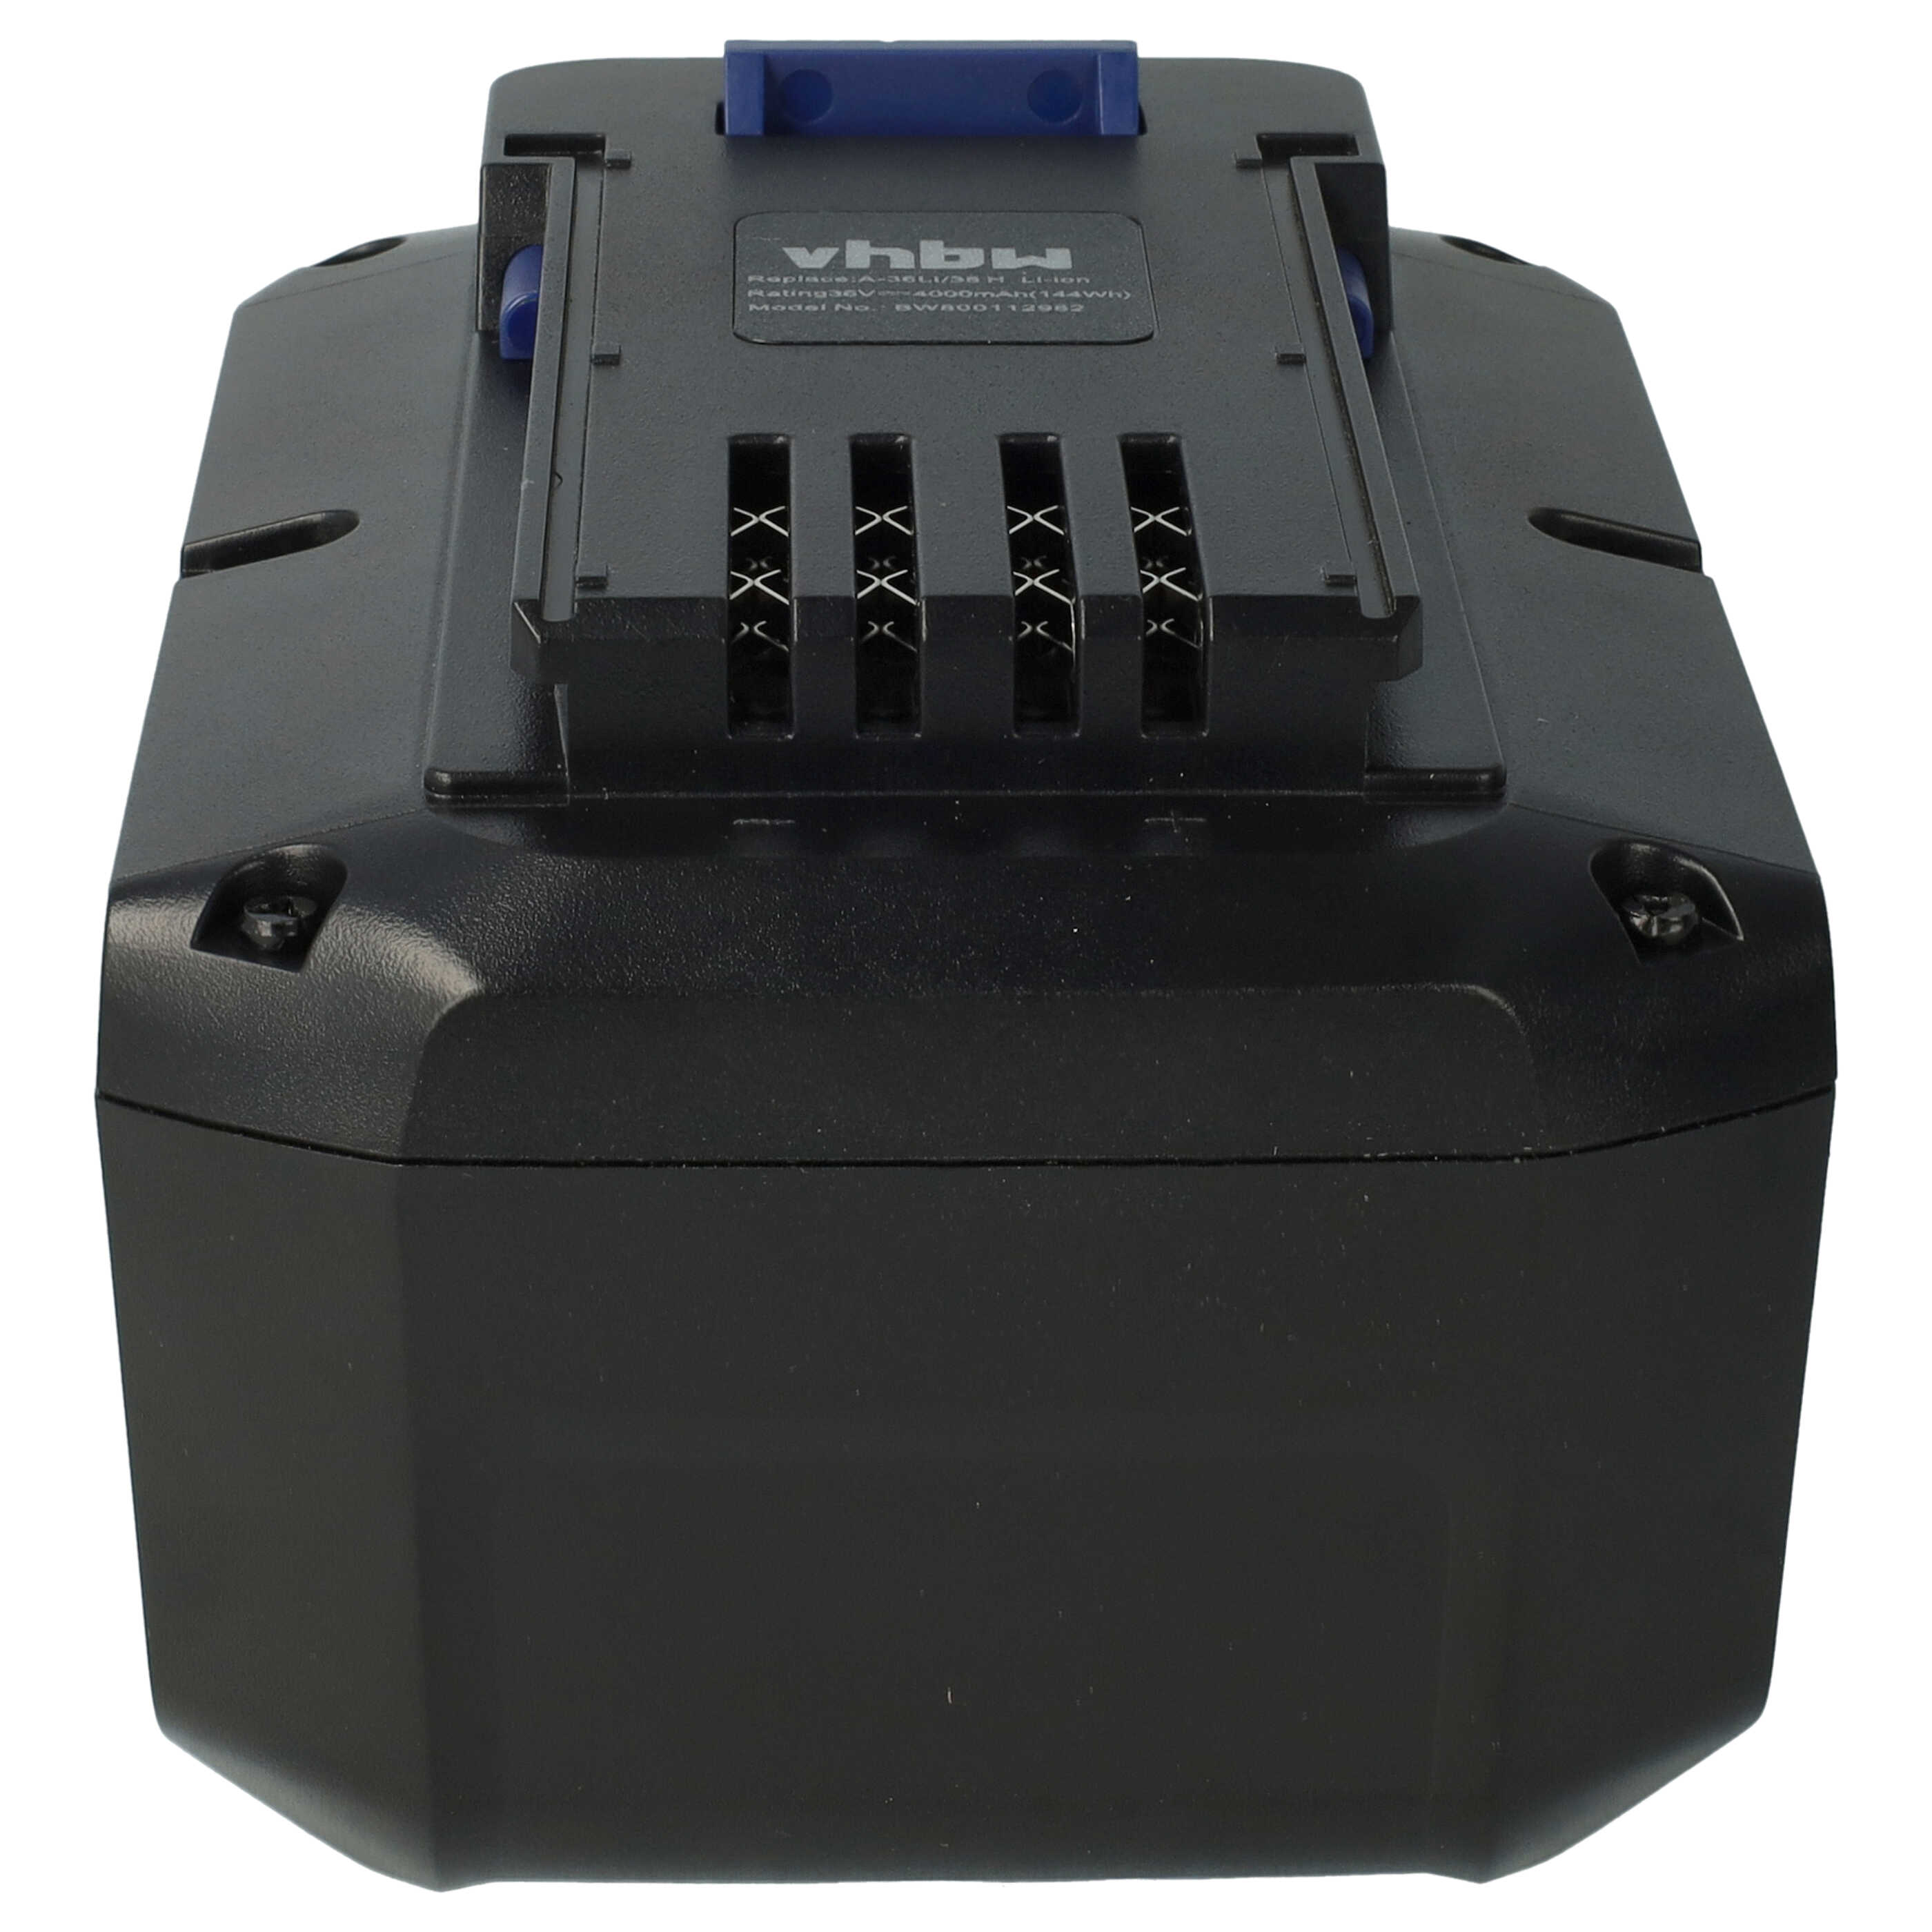 Lawnmower Battery Replacement for Lux Tools 1787233, 36LB2600 - 4000mAh 36V Li-Ion, black